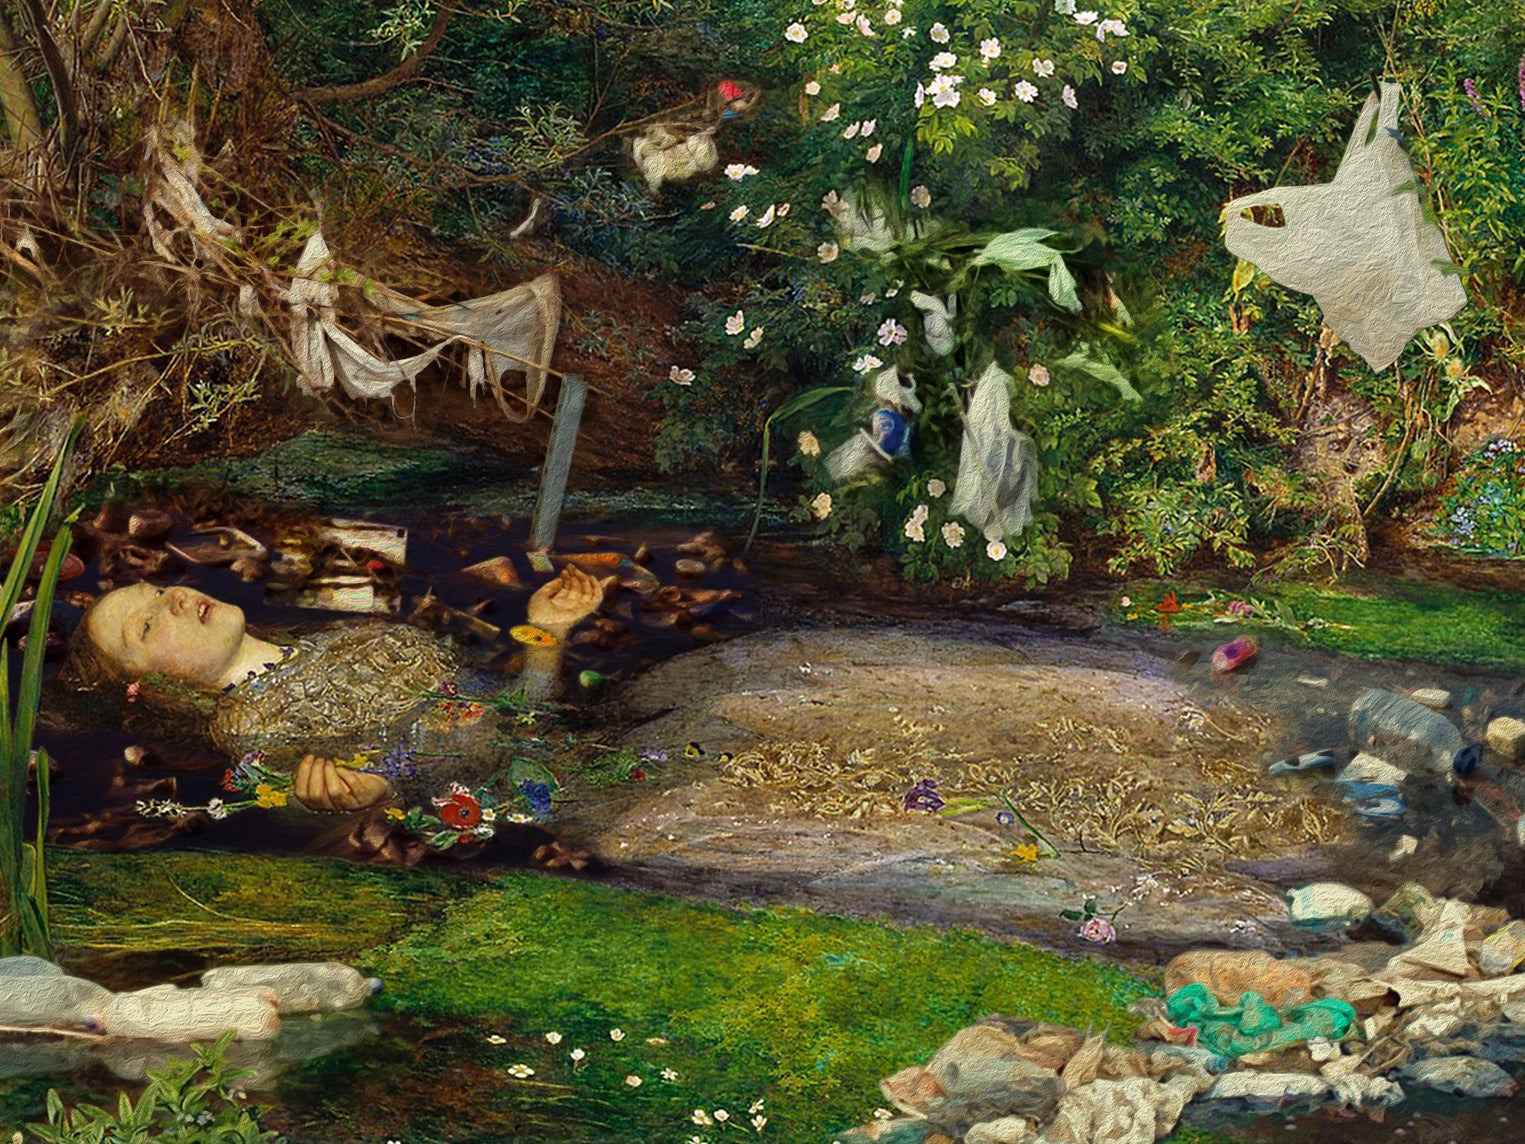 Sir John Everett Millais’s ‘Ophelia’ (1851-2) has been reimagined to reflect the pollution of Britain's rivers